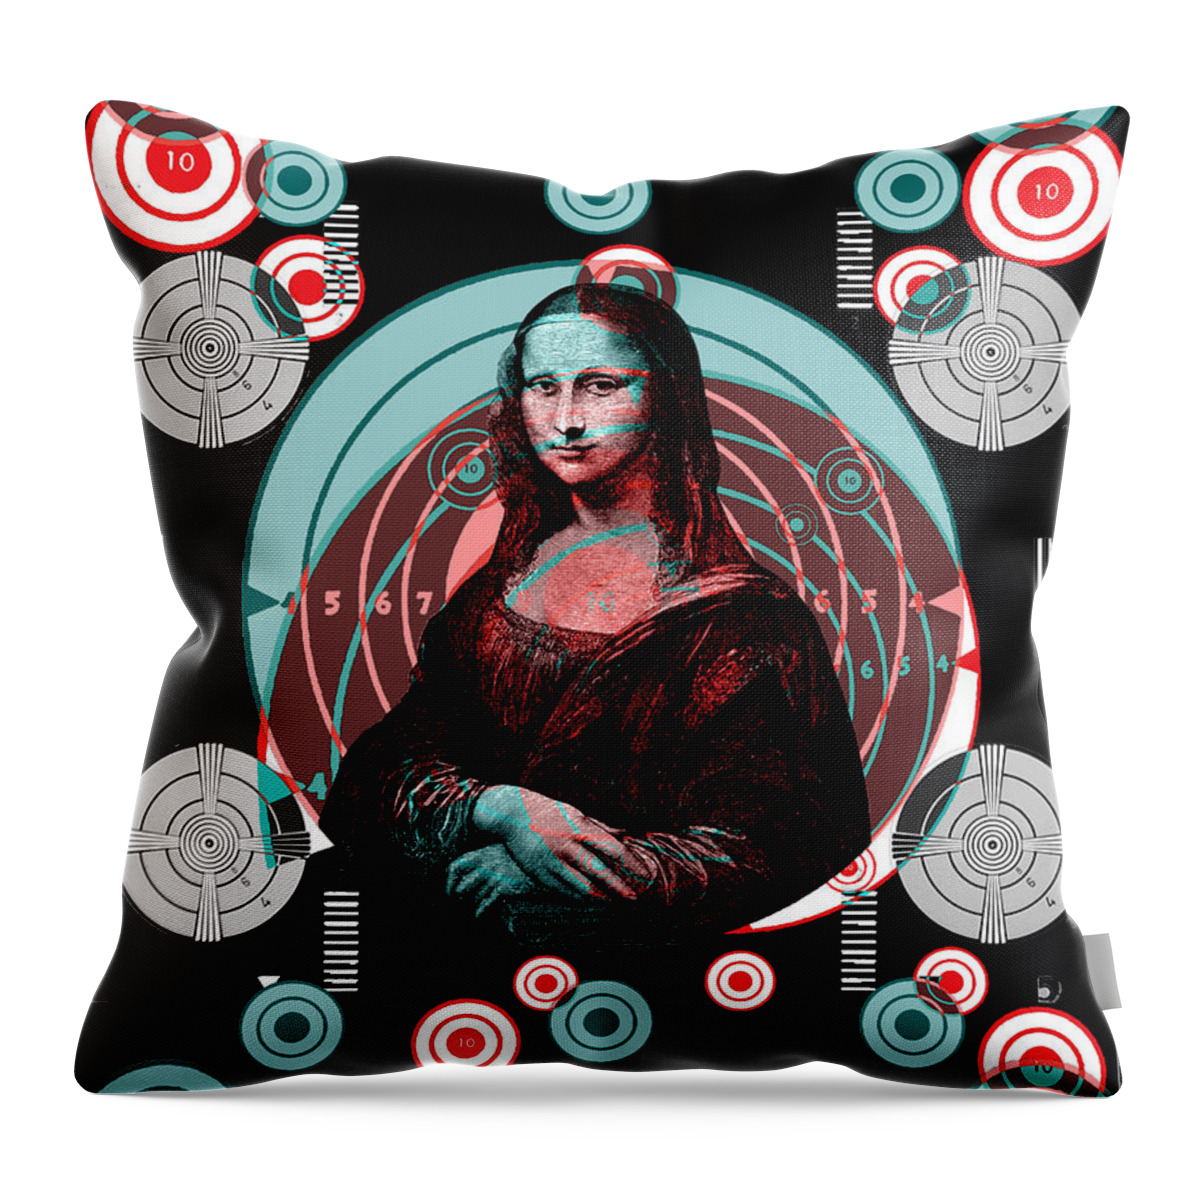 Digital Collage Throw Pillow featuring the digital art Mona TV Test Pattern by Eric Edelman